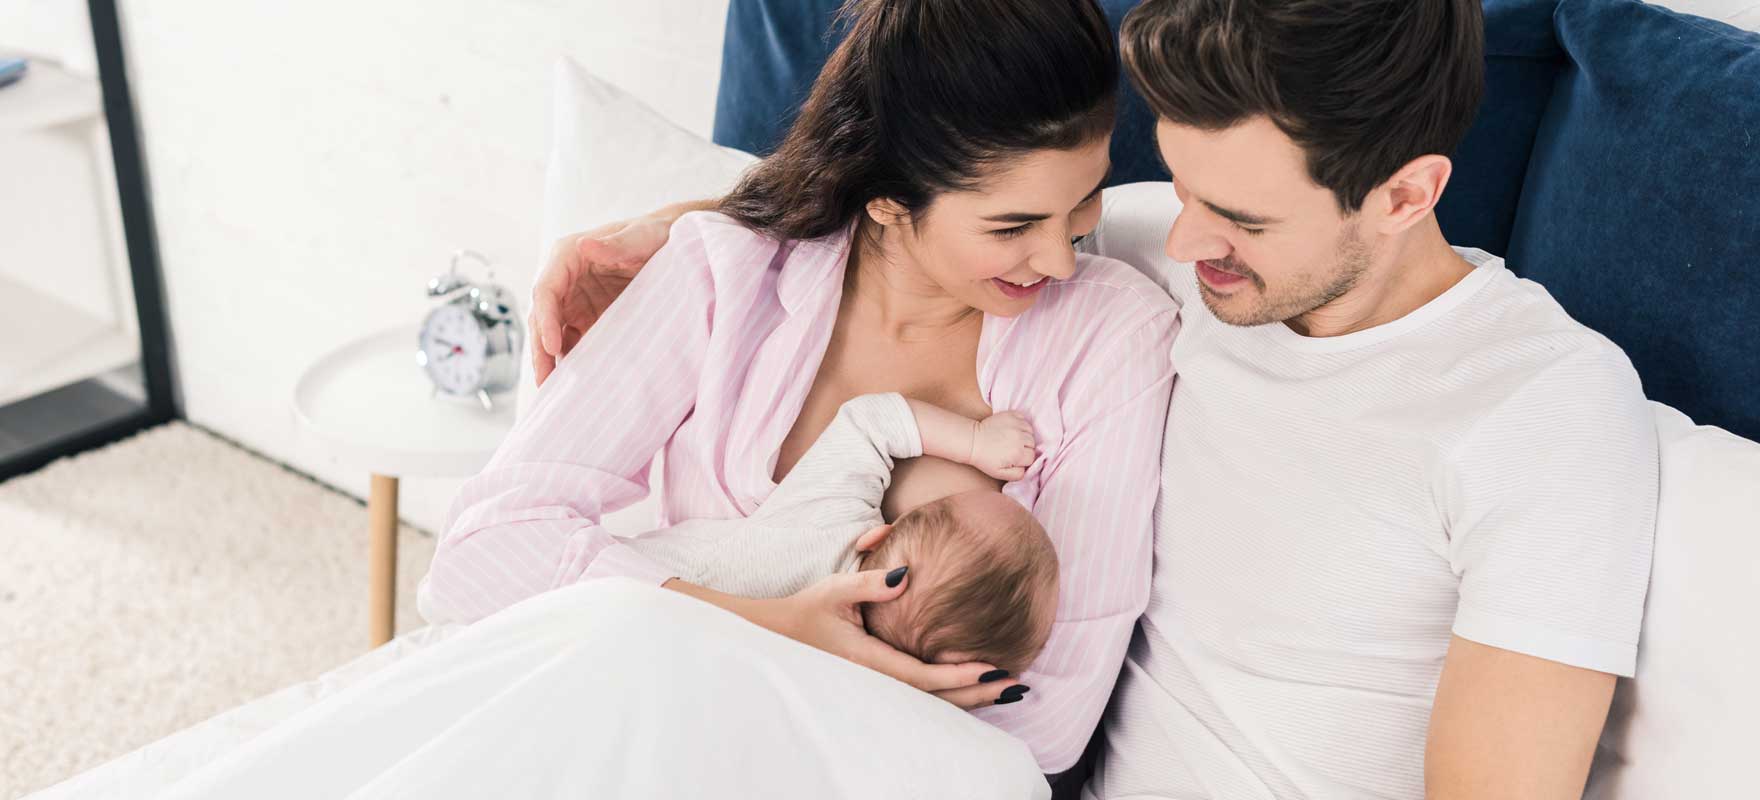 couple in bed together with woman nursing their baby while man supportively watches